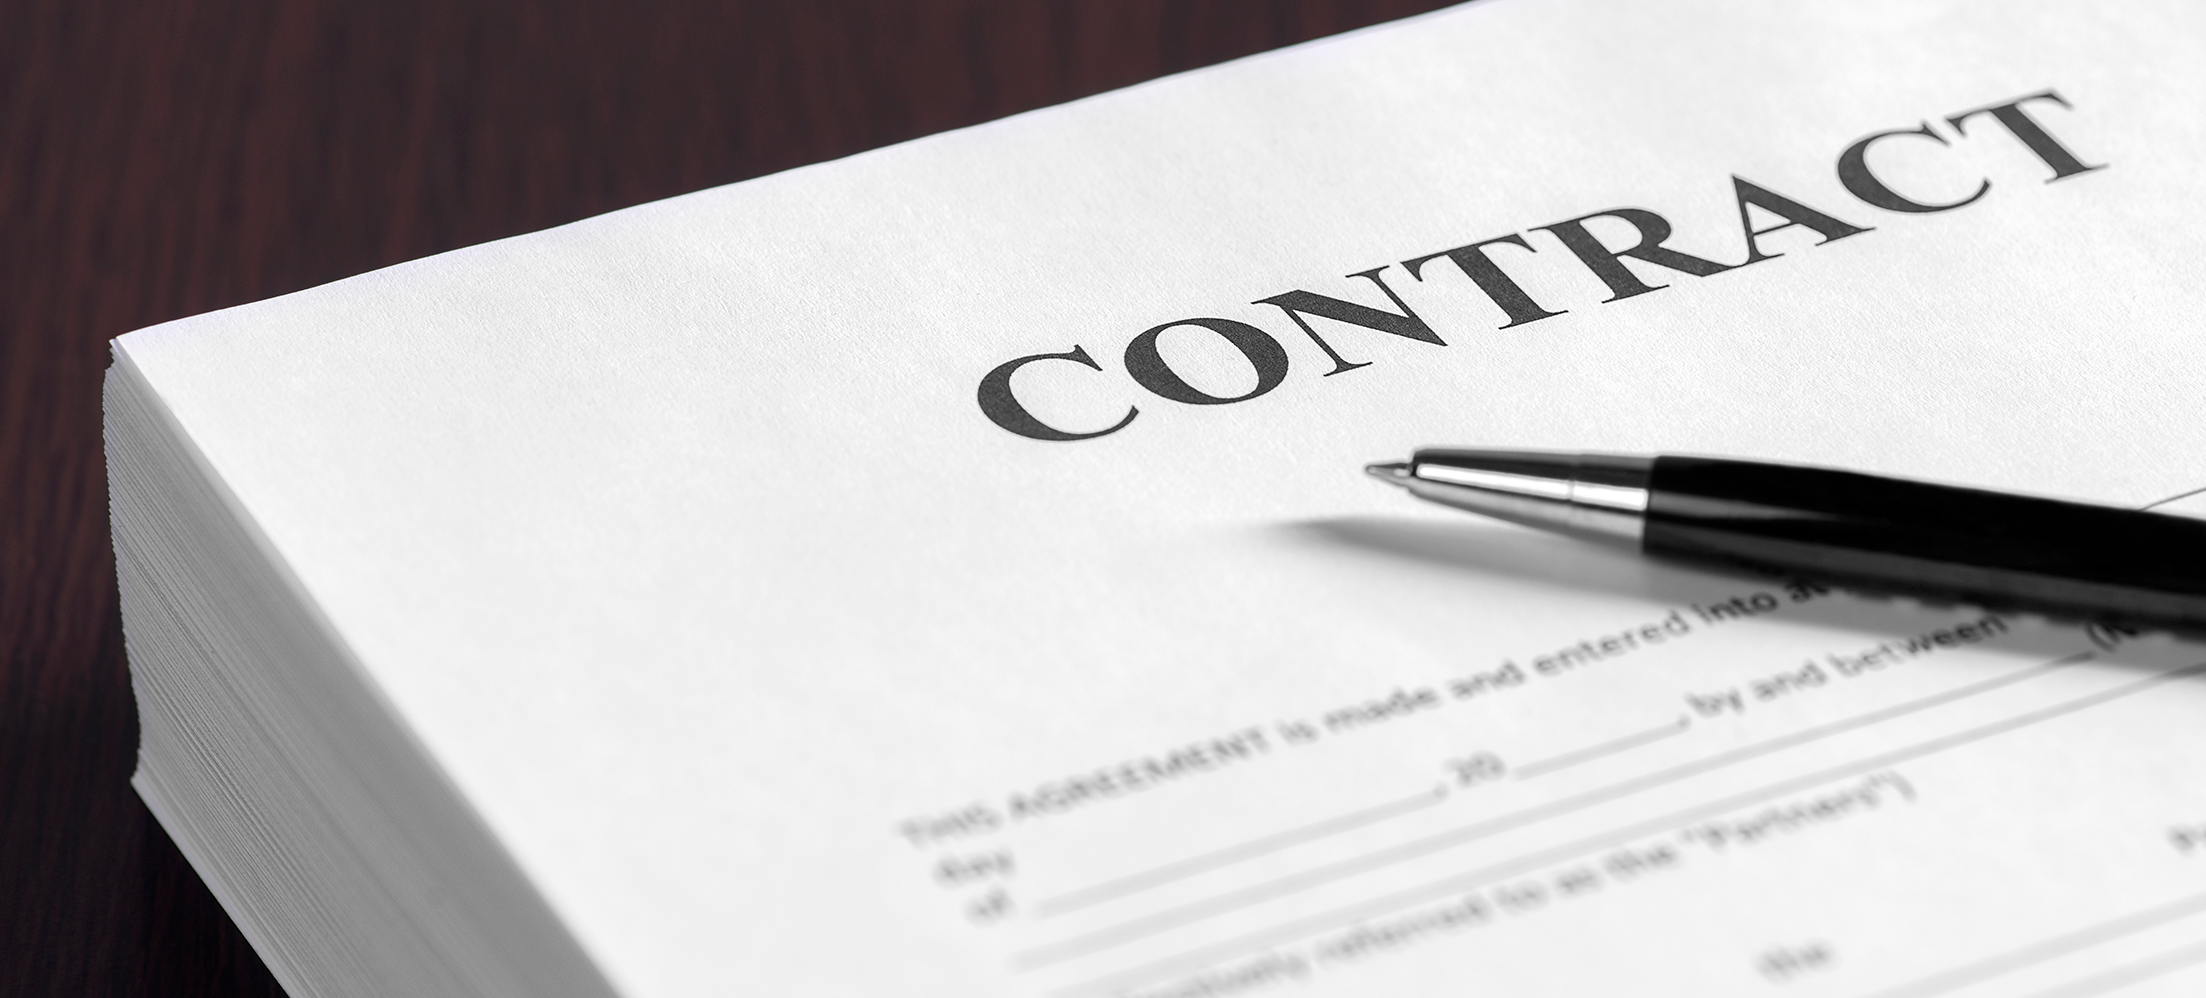 negotiate better vendor contracts to keep your community association assessments low